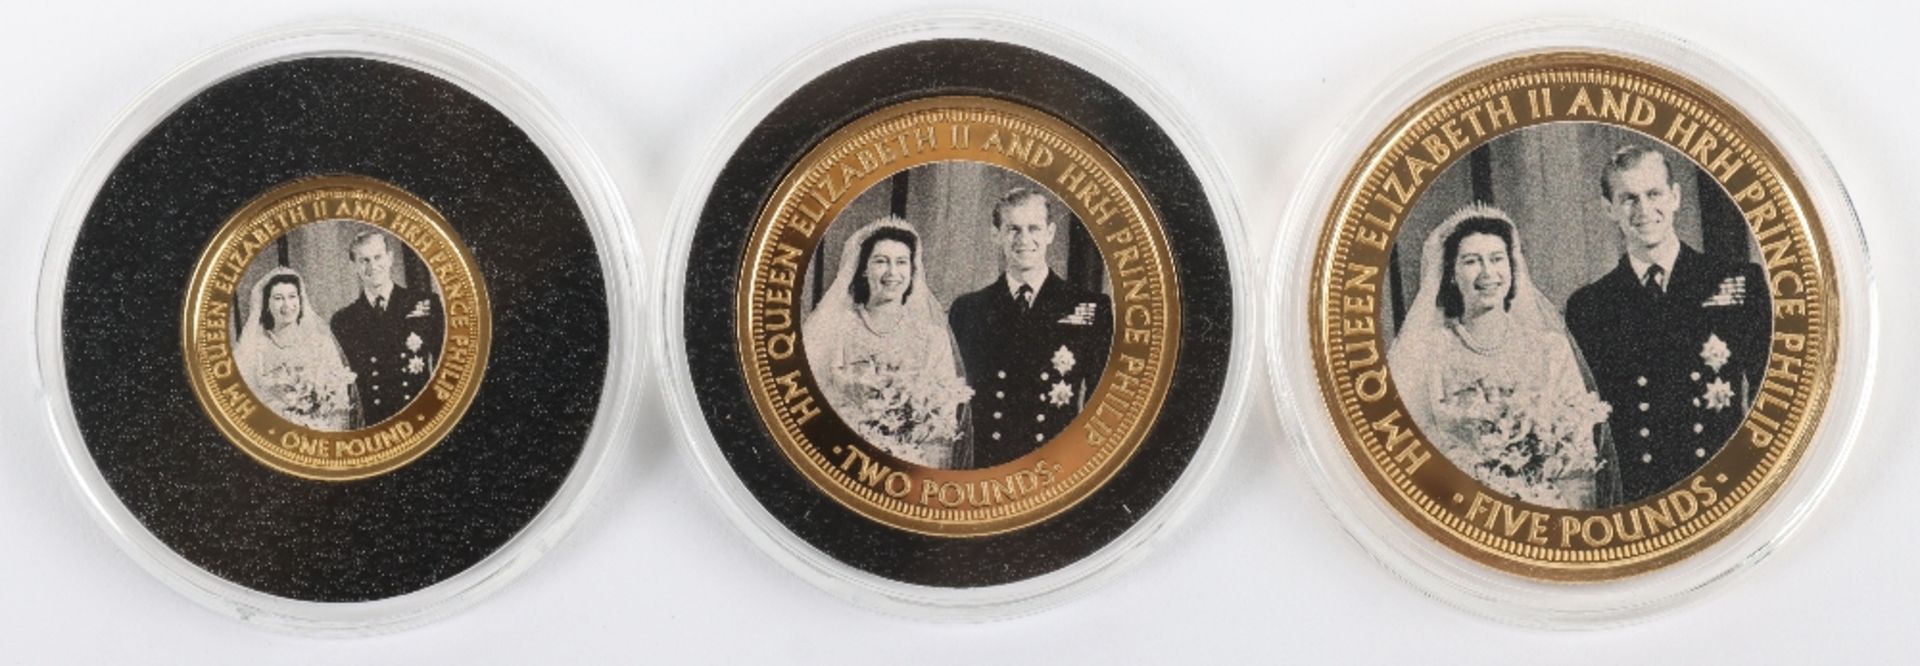 Platinum Wedding Anniversary 22ct gold proof Five Pound (40g), Two Pound (16g) and One Pound (8g) - Image 2 of 3